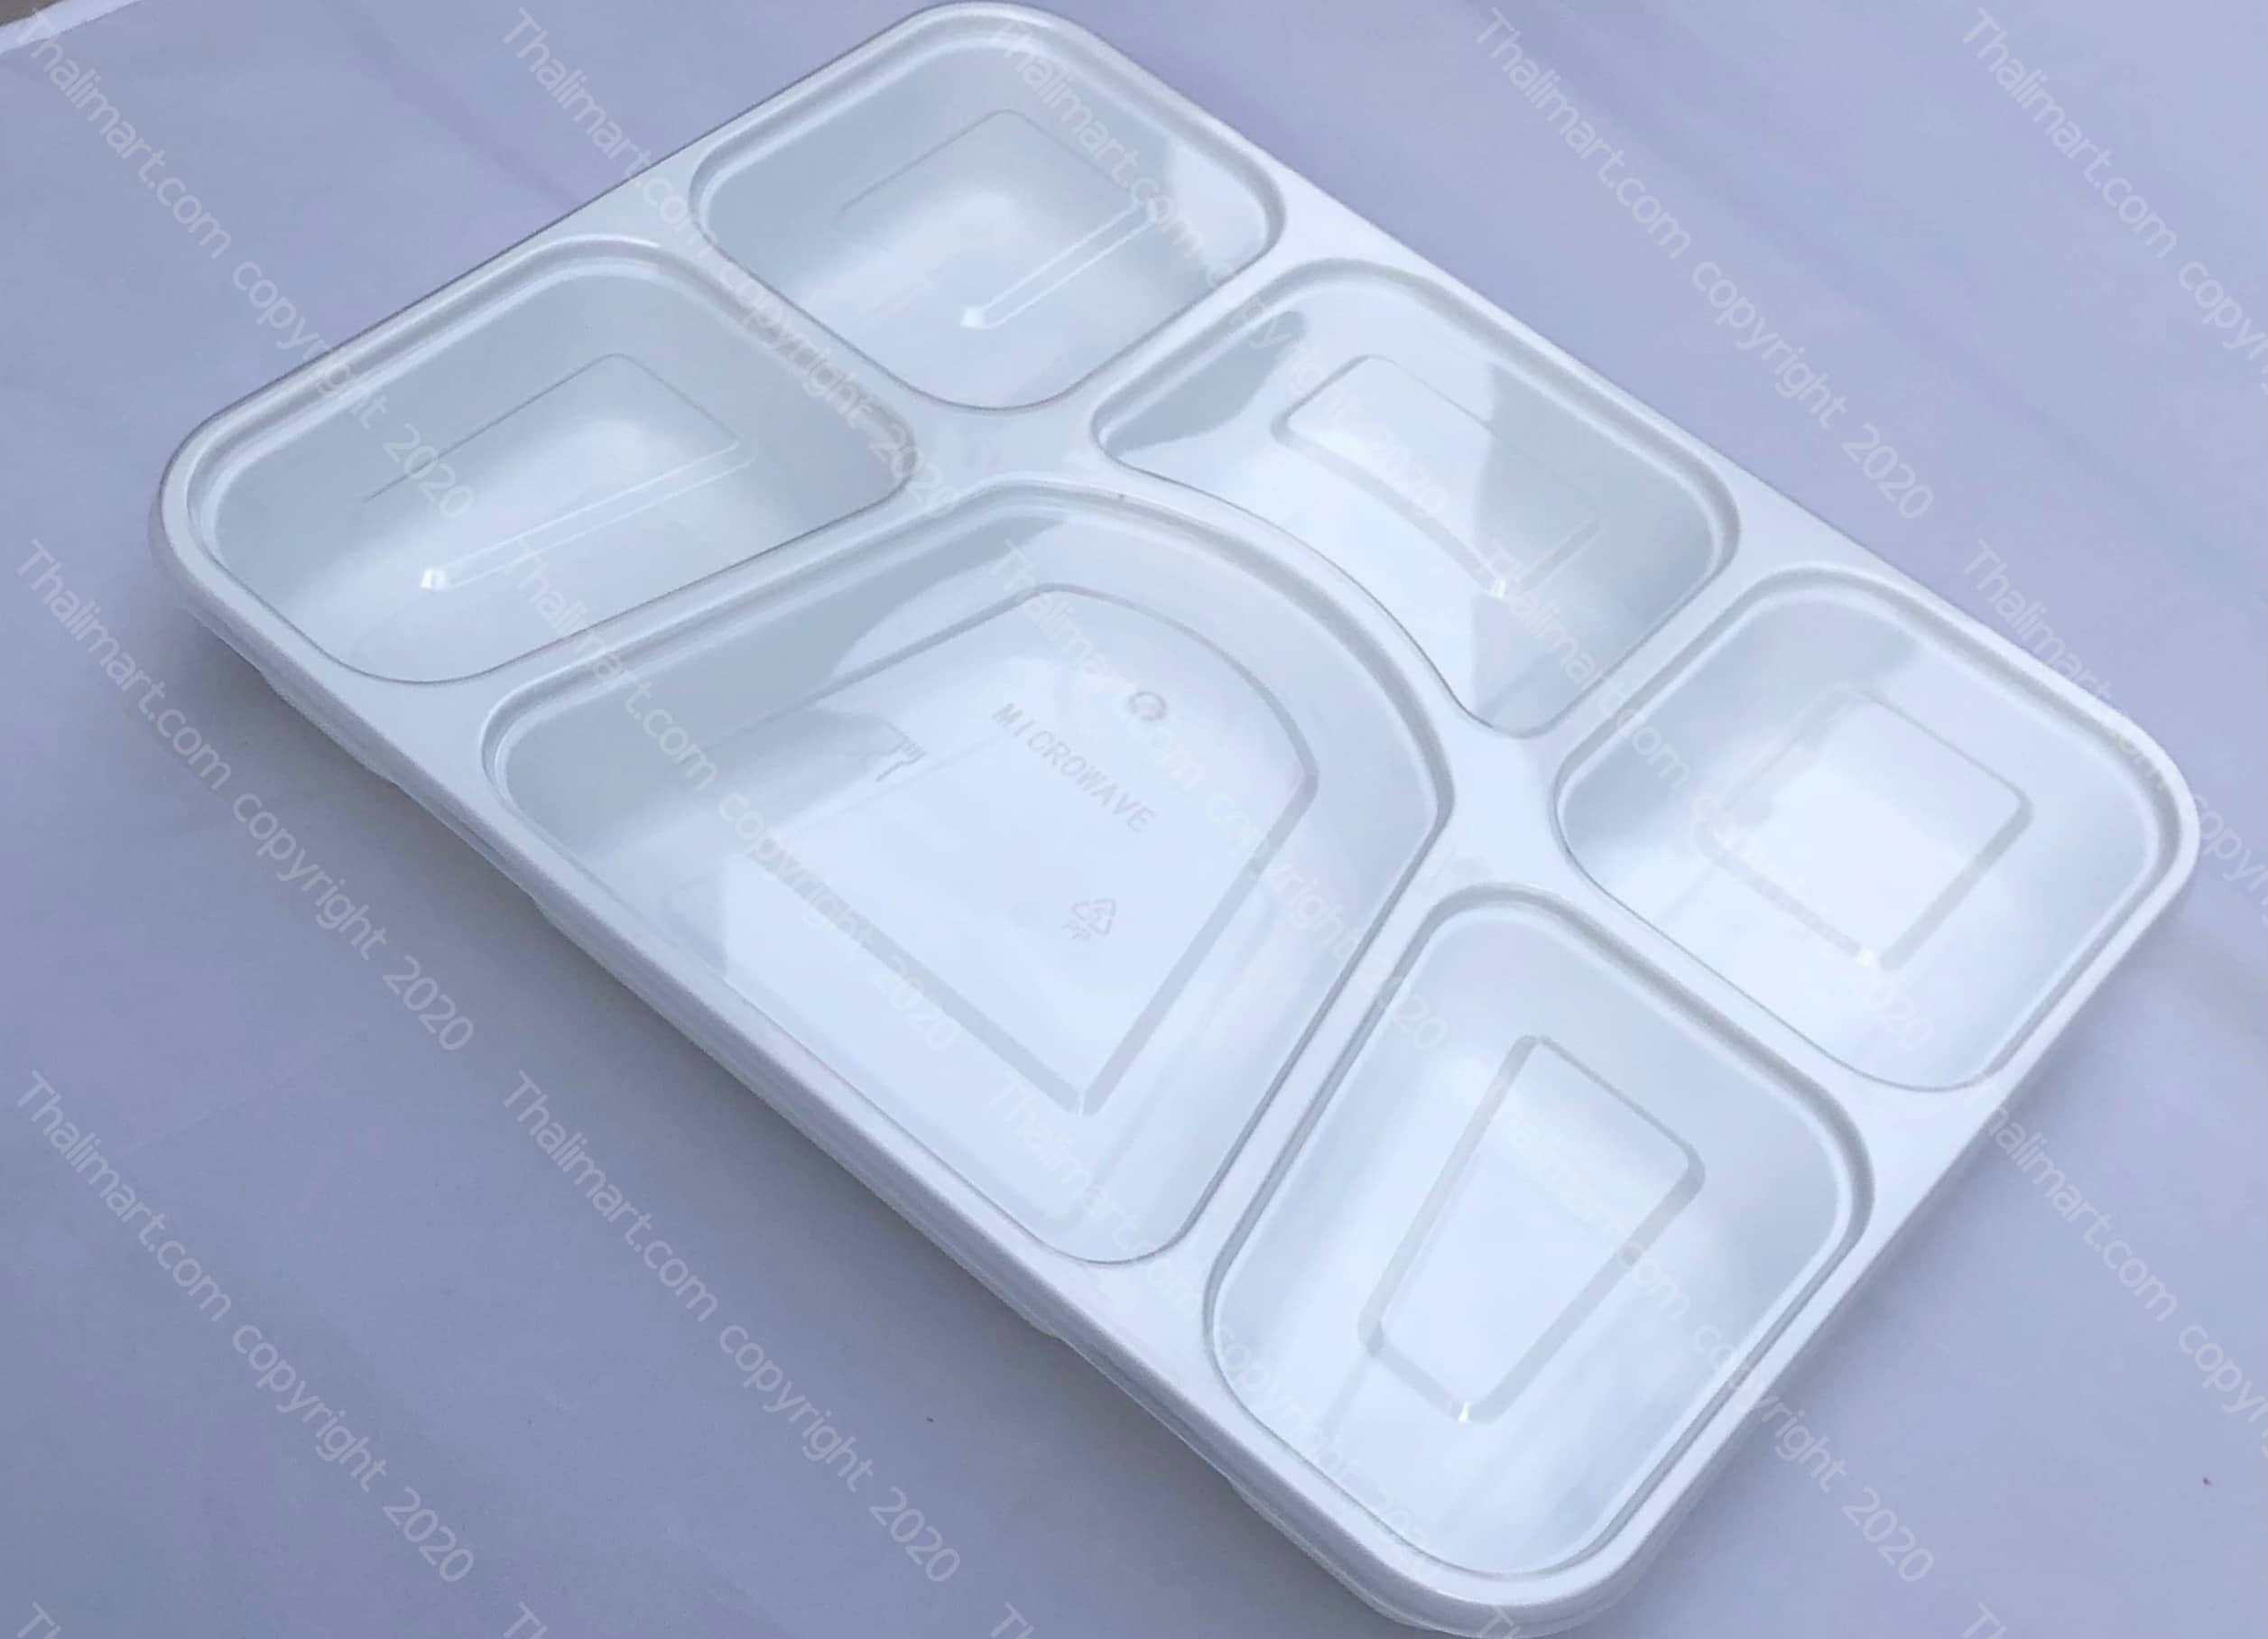 Thalimart 100 Plates & Lids Disposable Rectangle 6 Compartment Plastic  Plate White with Clear Lid